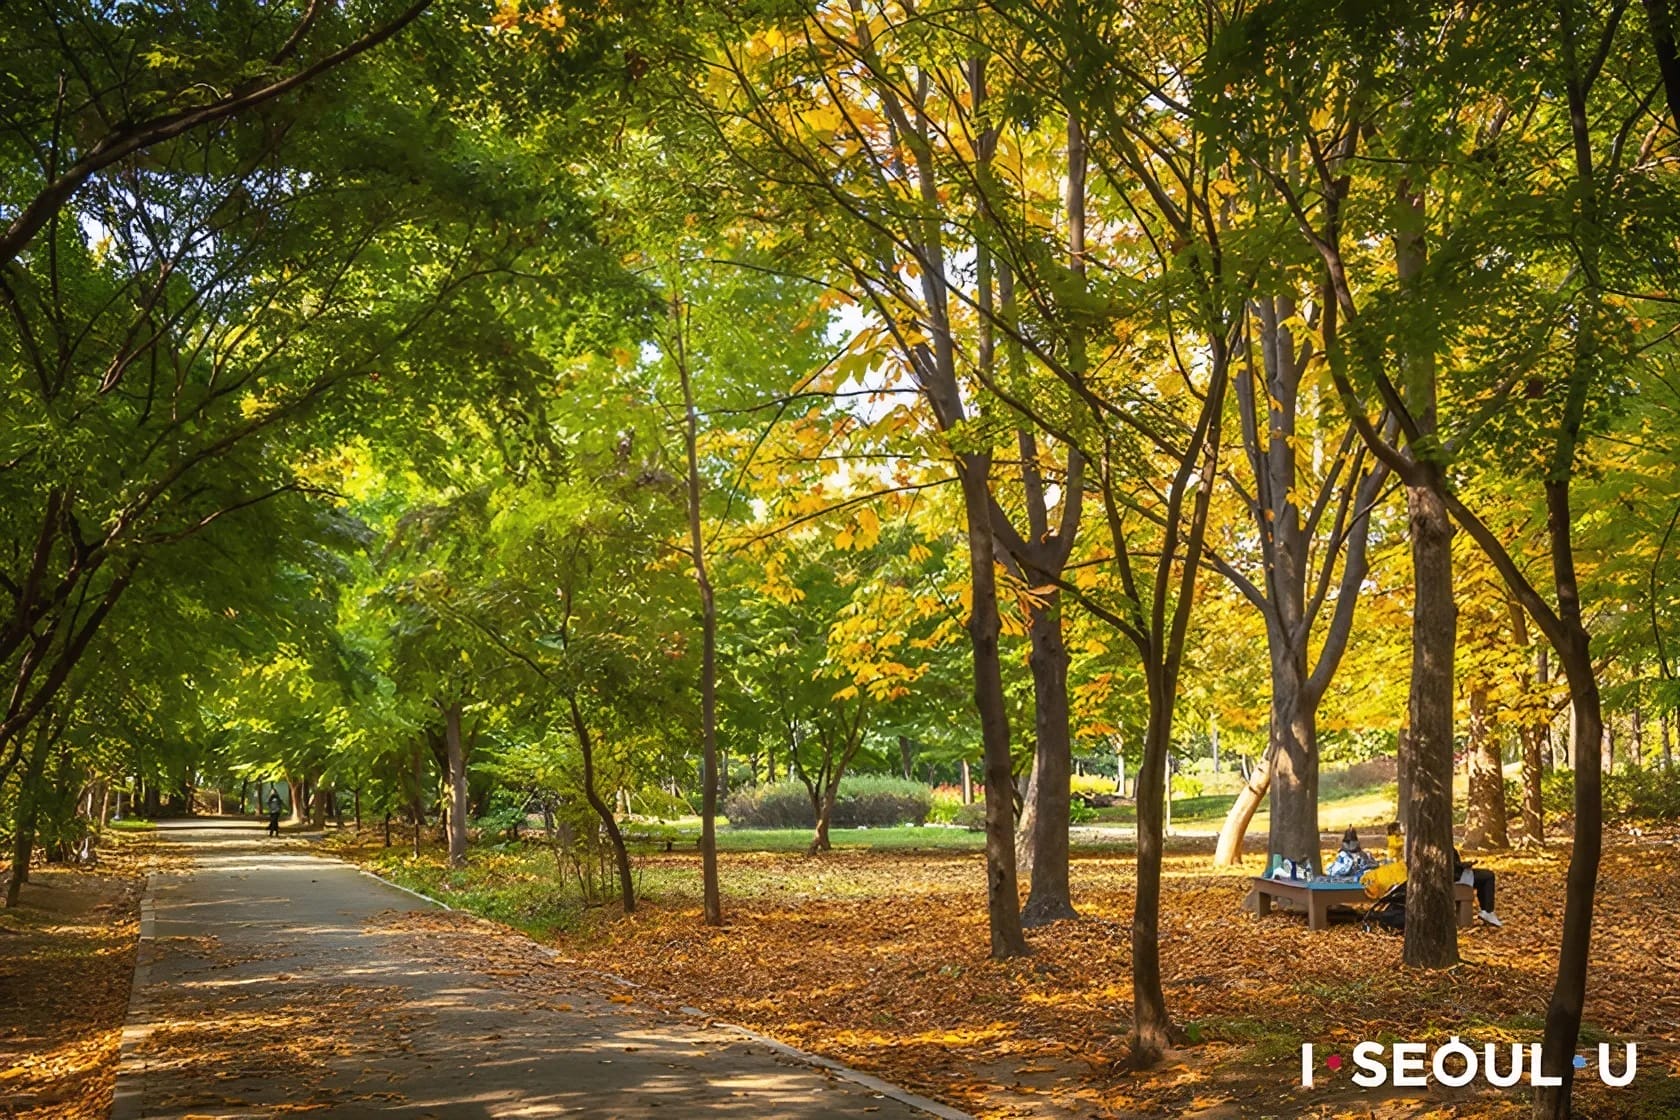 Summer Getaways in Seoul - 20+ Ways to Experience Nature in Seoul During Summer 23